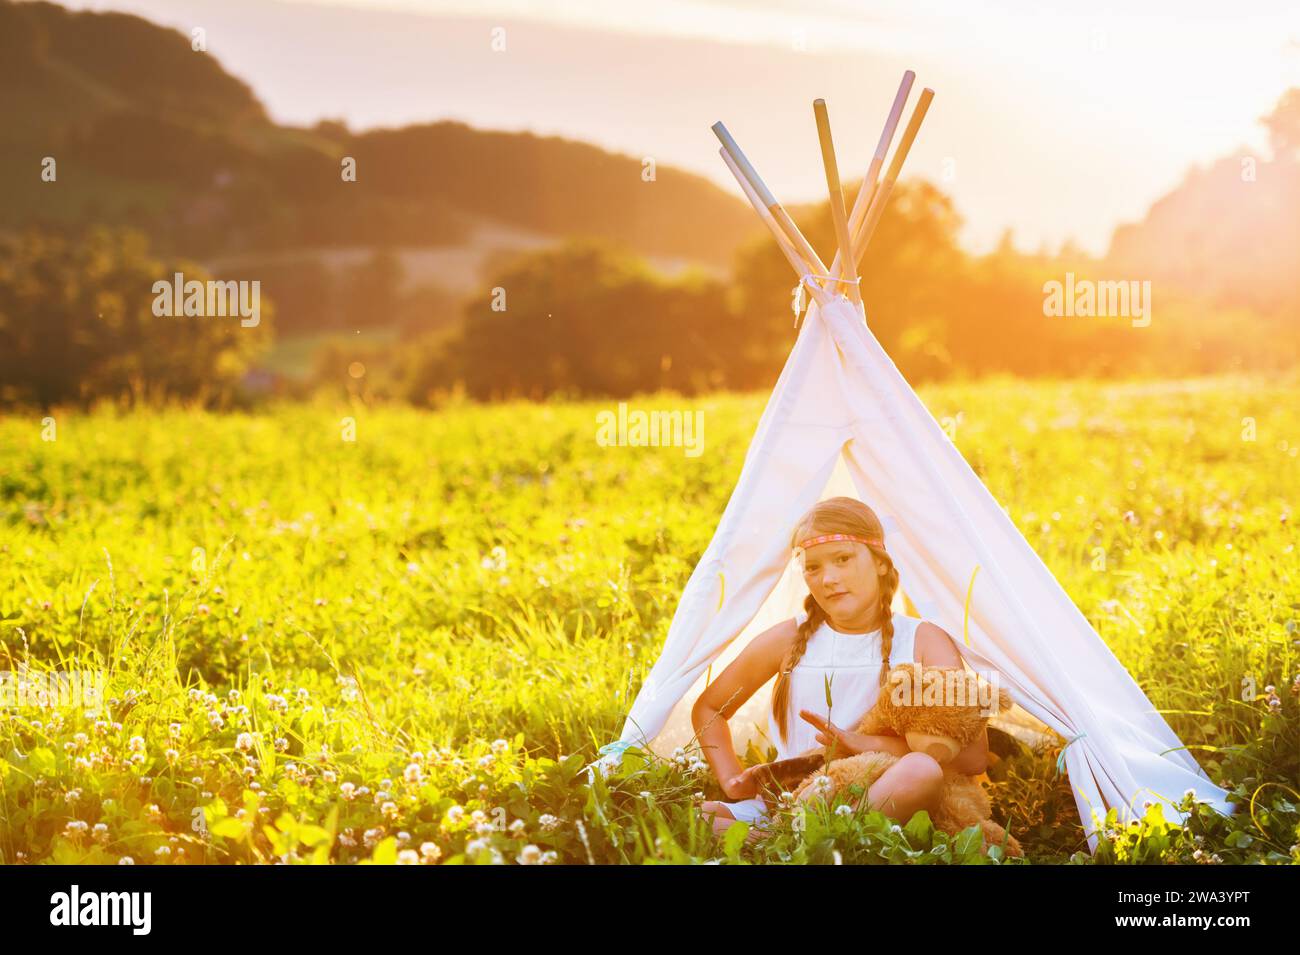 Happy kid girl sitting in a tent on a nice warm evening, playing drum music. Stock Photo